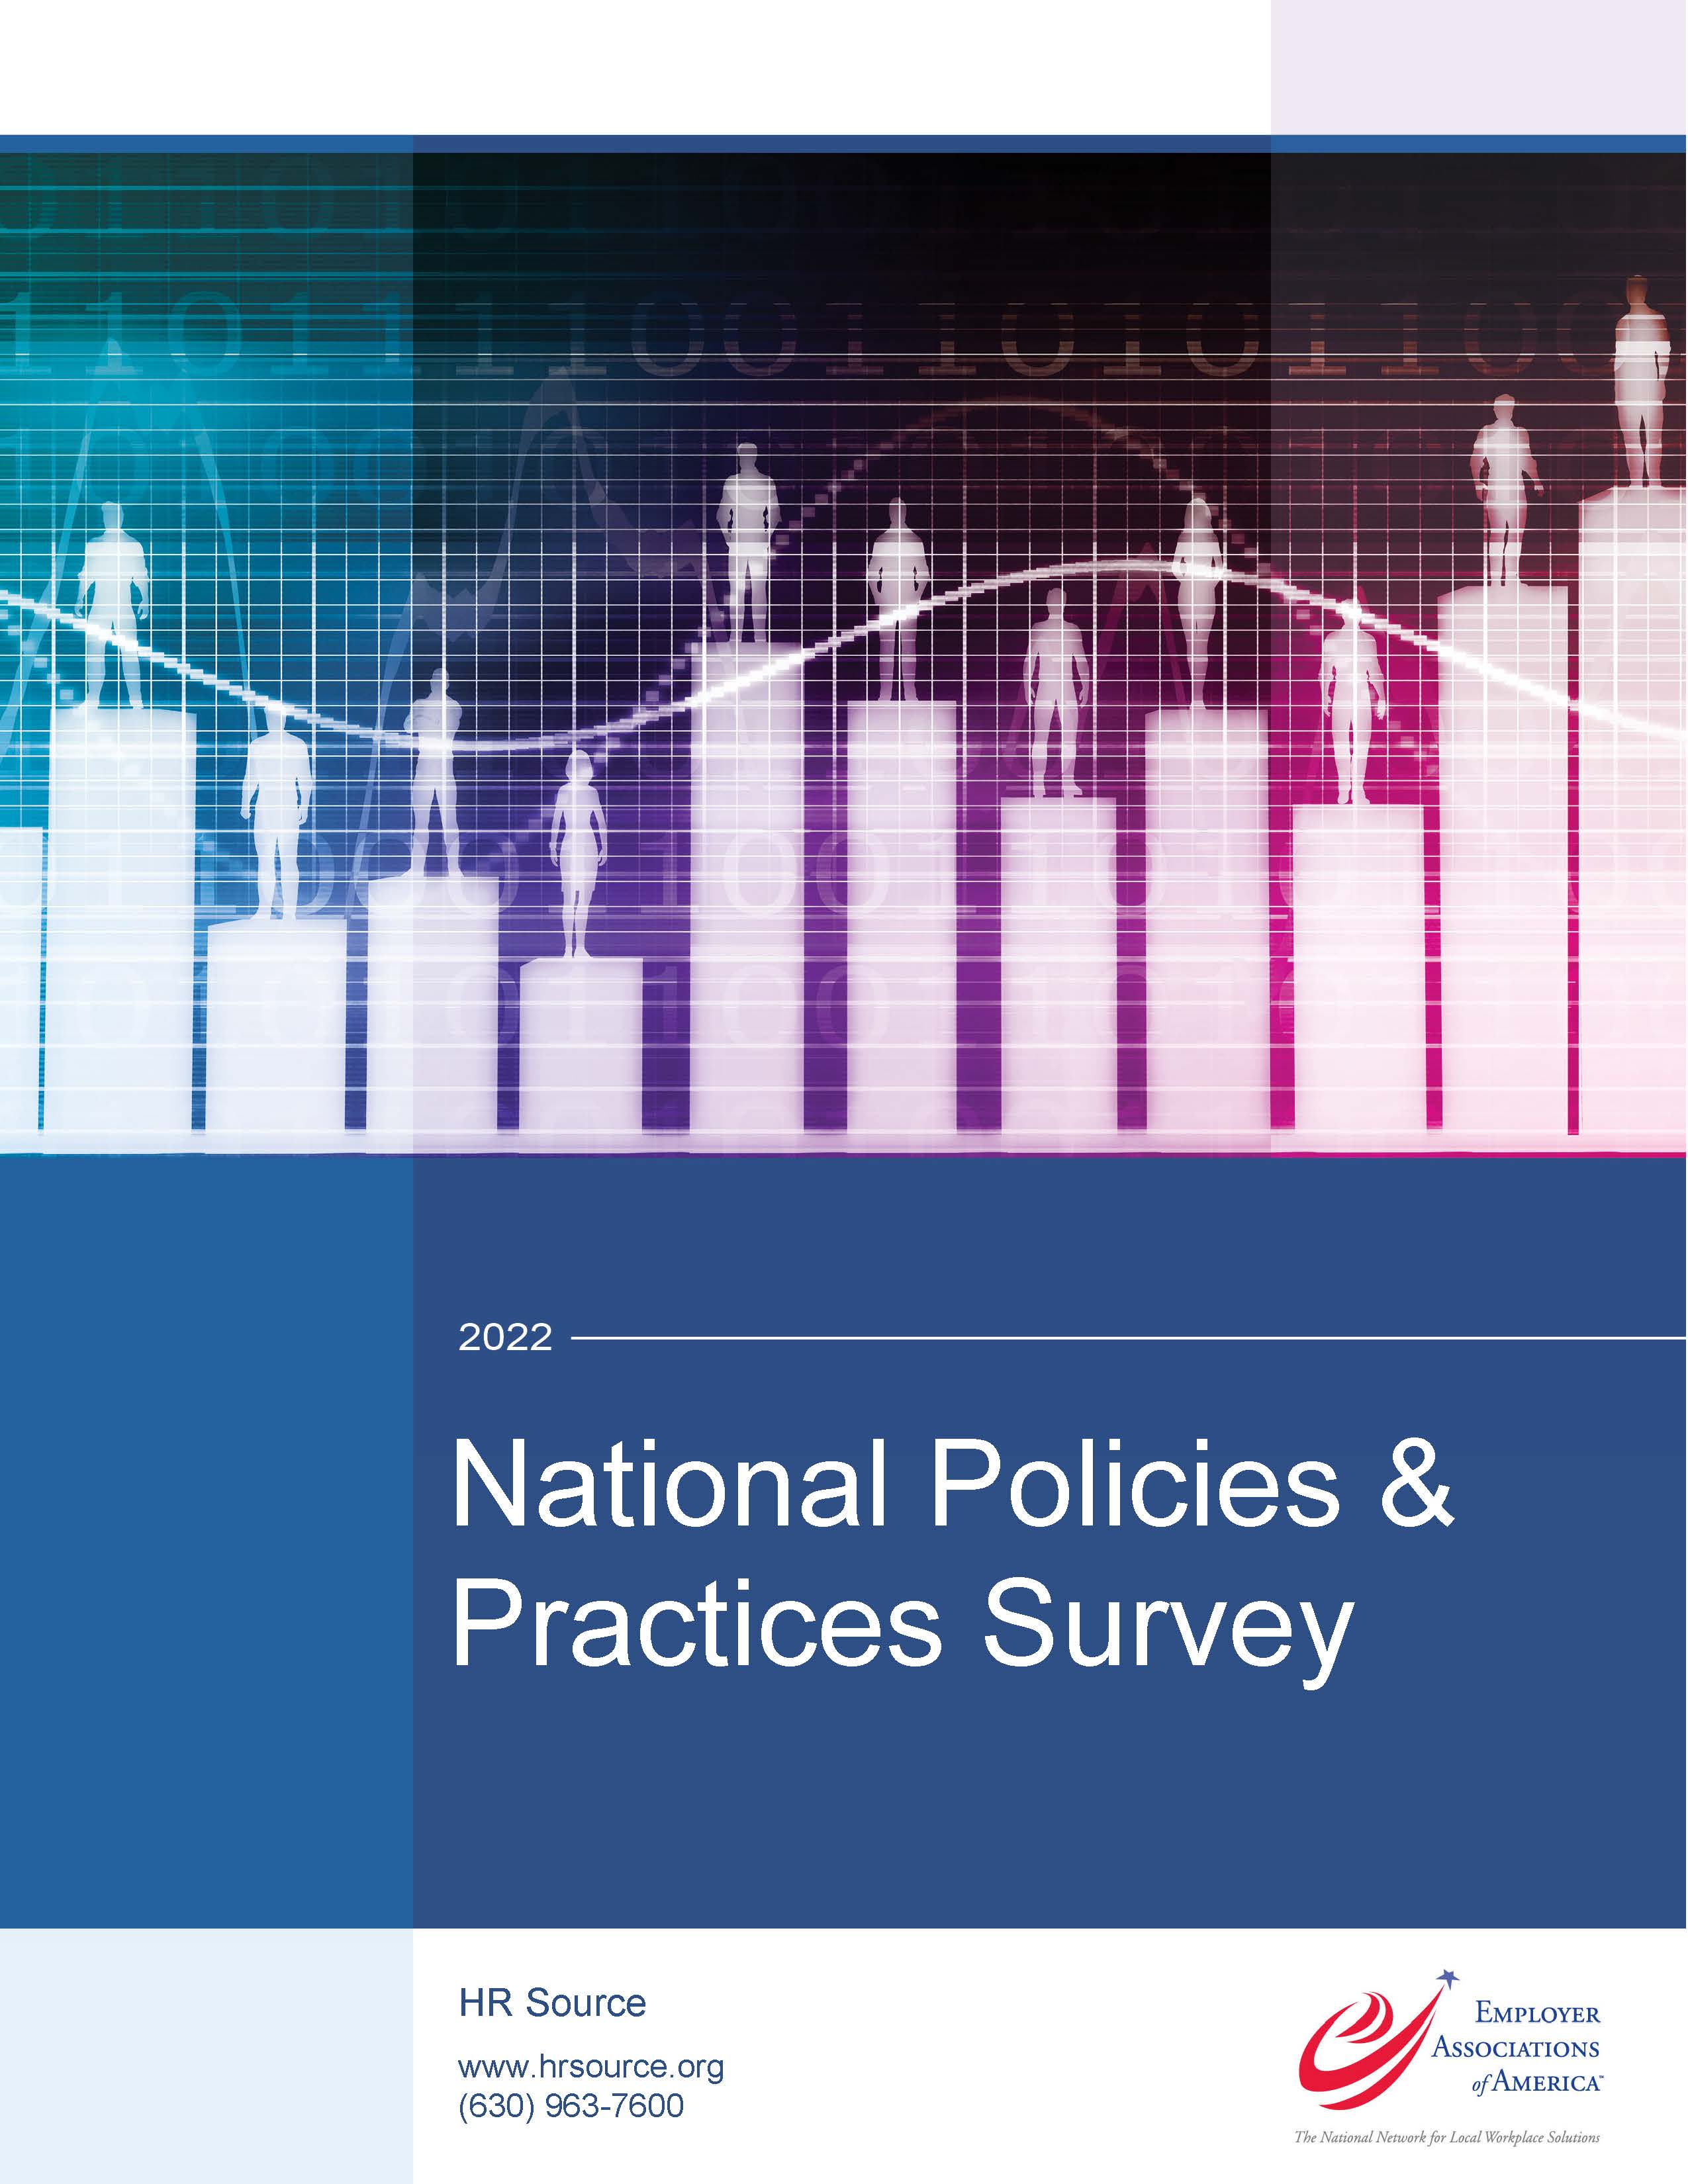 National Policies and Practices Survey 2022